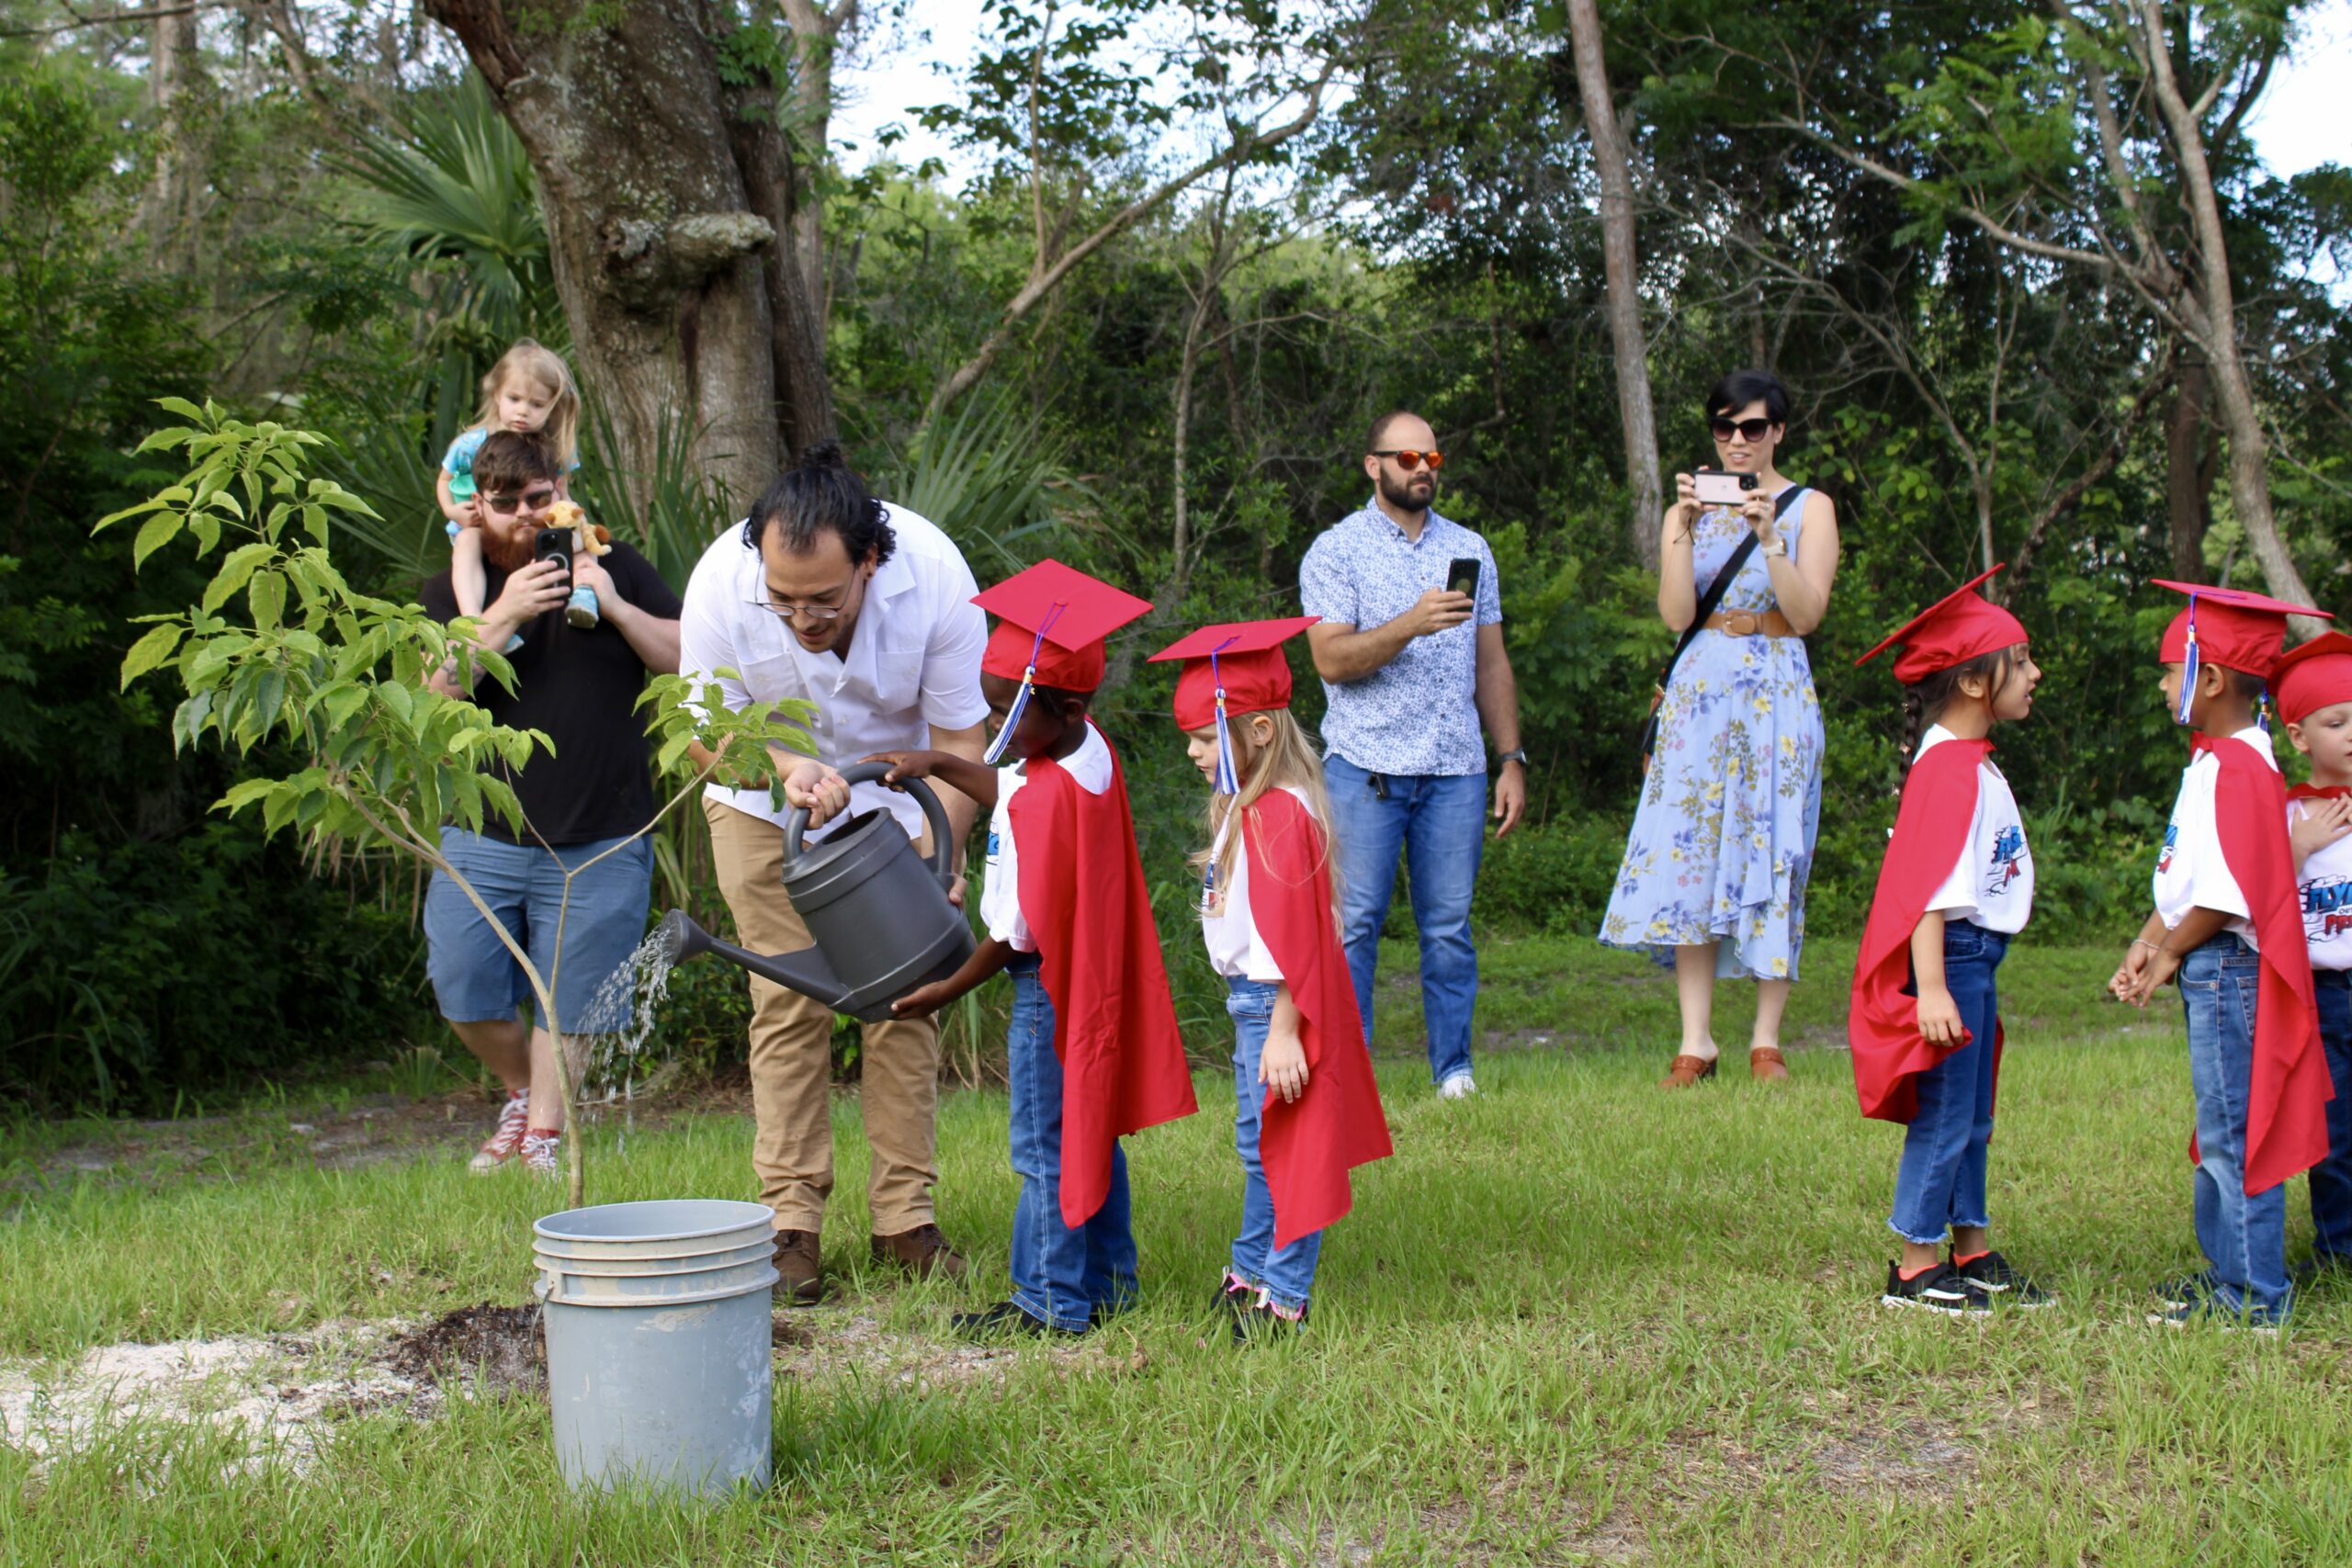 VPK Graduate watering the class learning tree, planted at their graduation ceremony